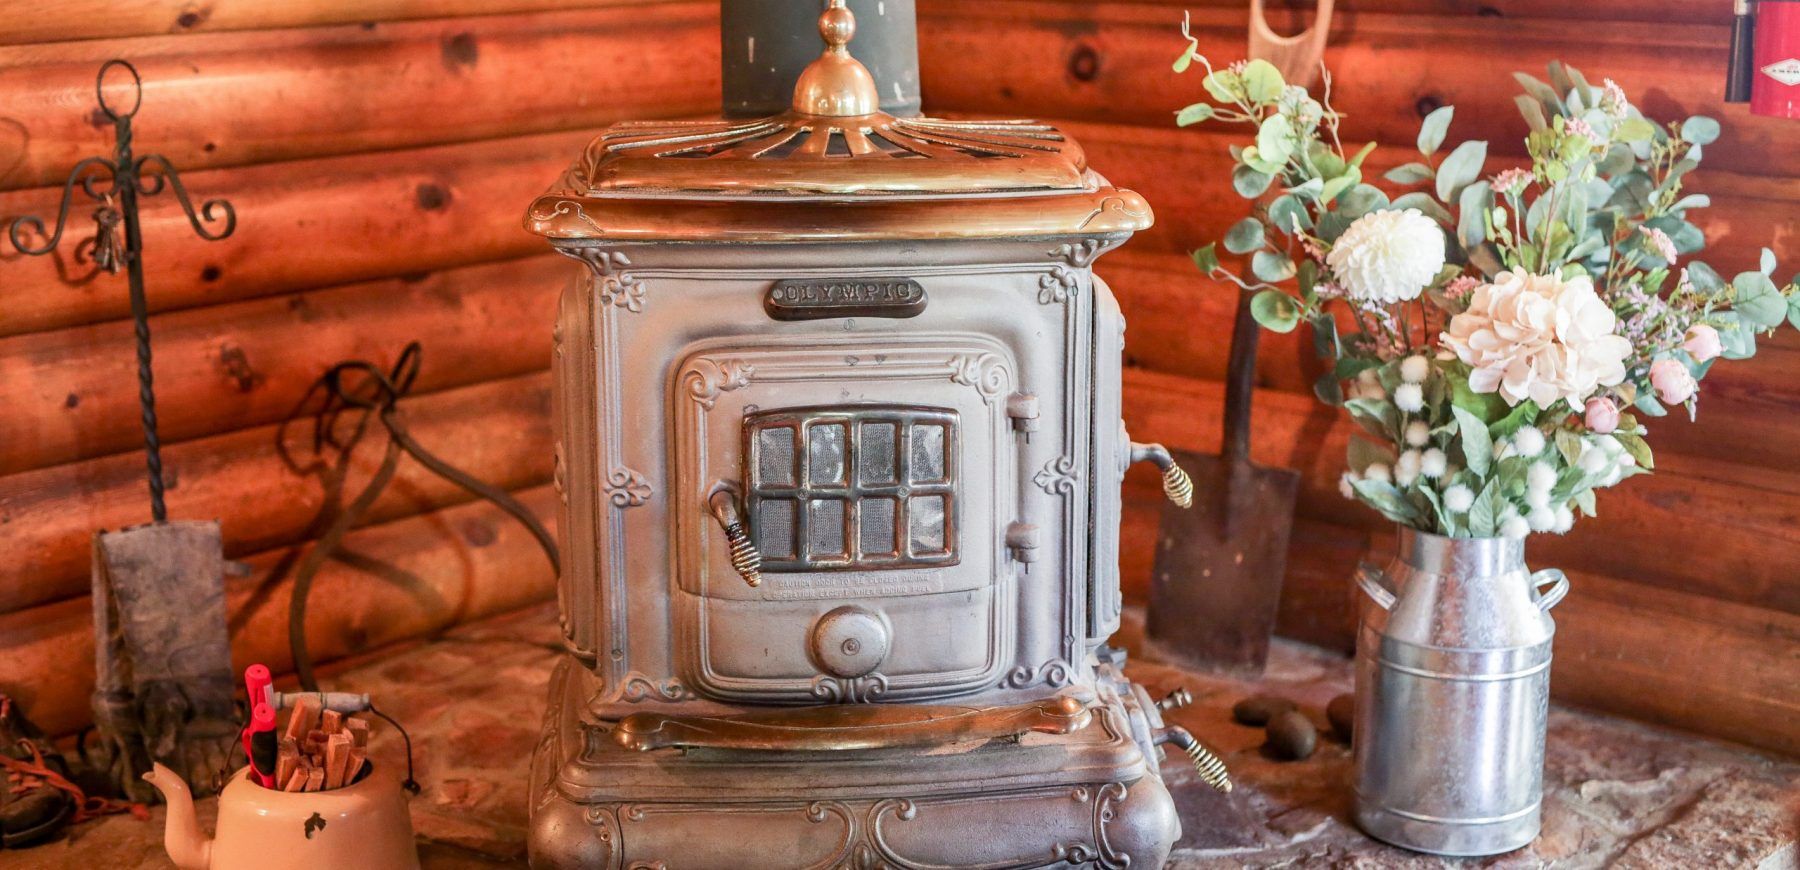 Dining Room Wood Stove